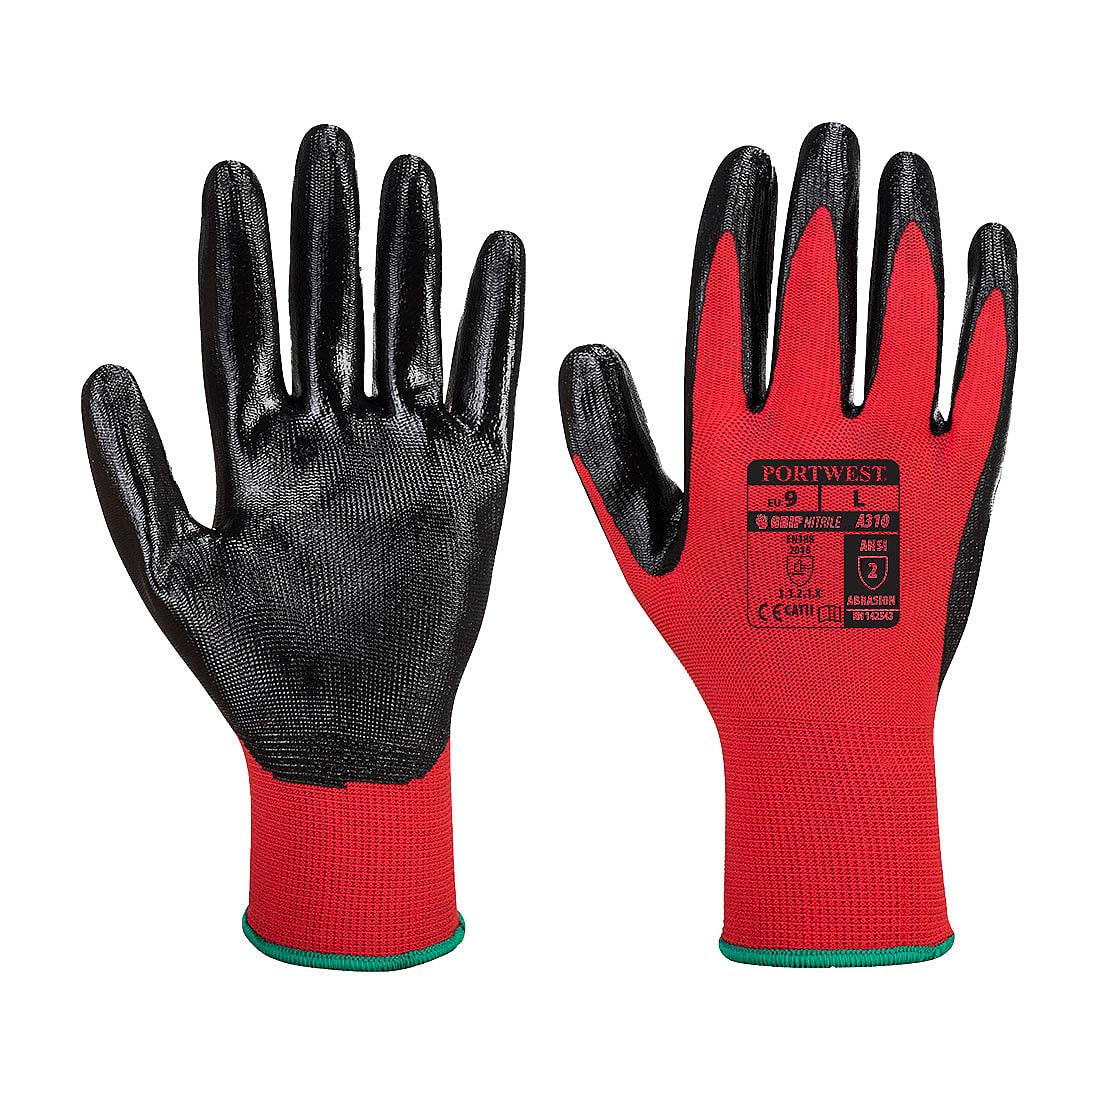 Portwest Flexo Grip Nitrile Gloves in Red / Black (Product Code: A310)